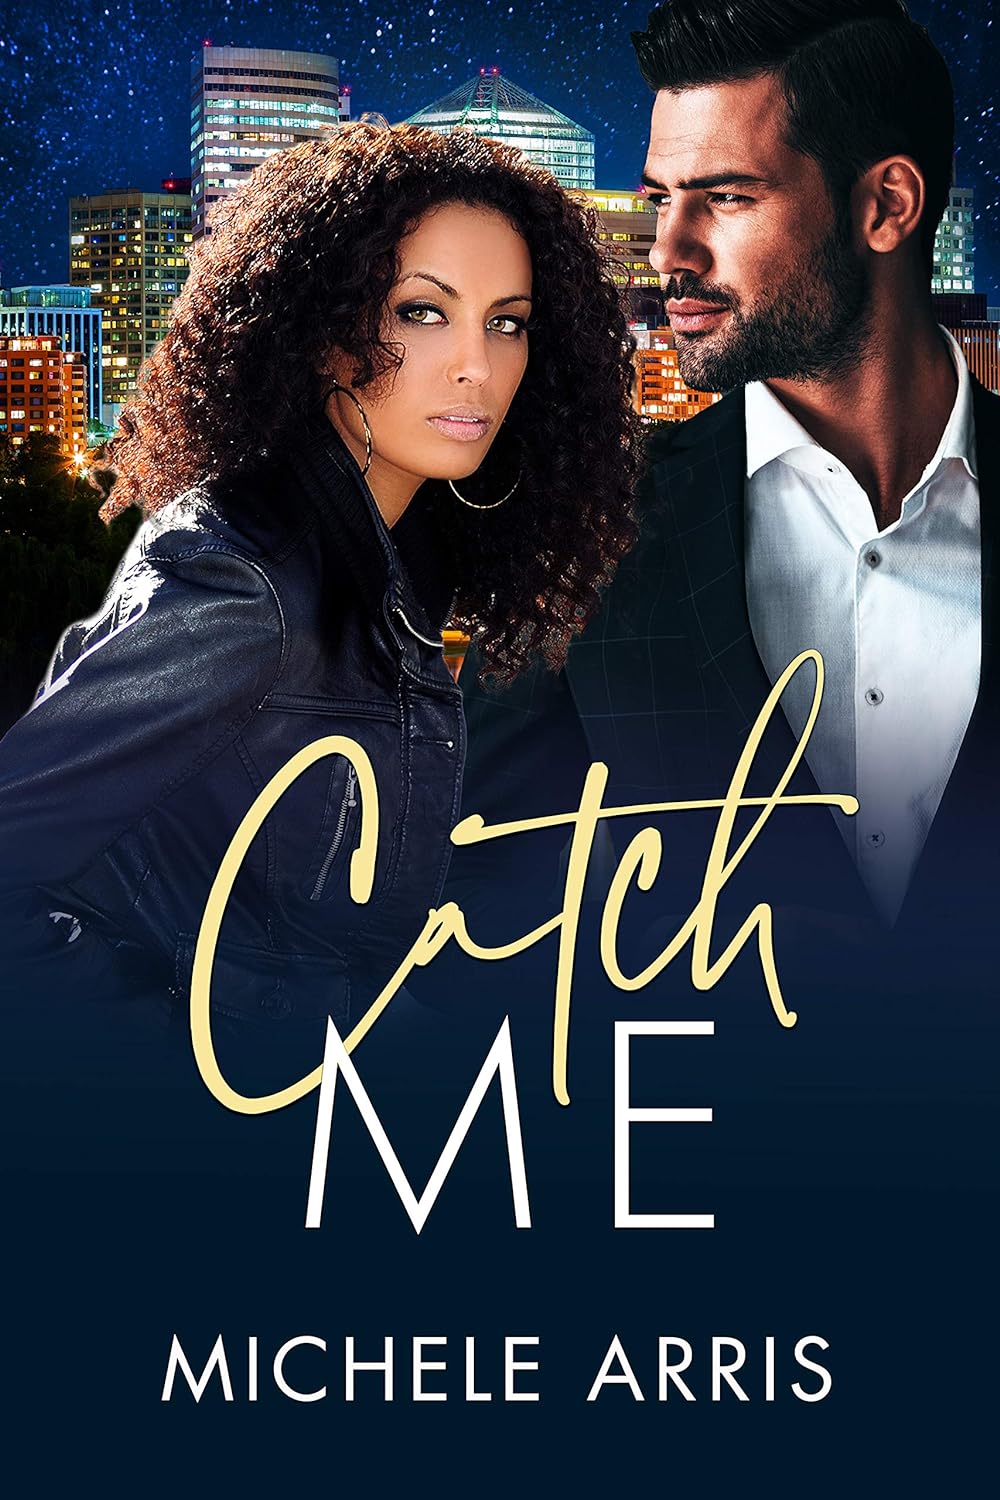 Catch Me Tycoon’s Temptation by Bestselling Author Michele Arris